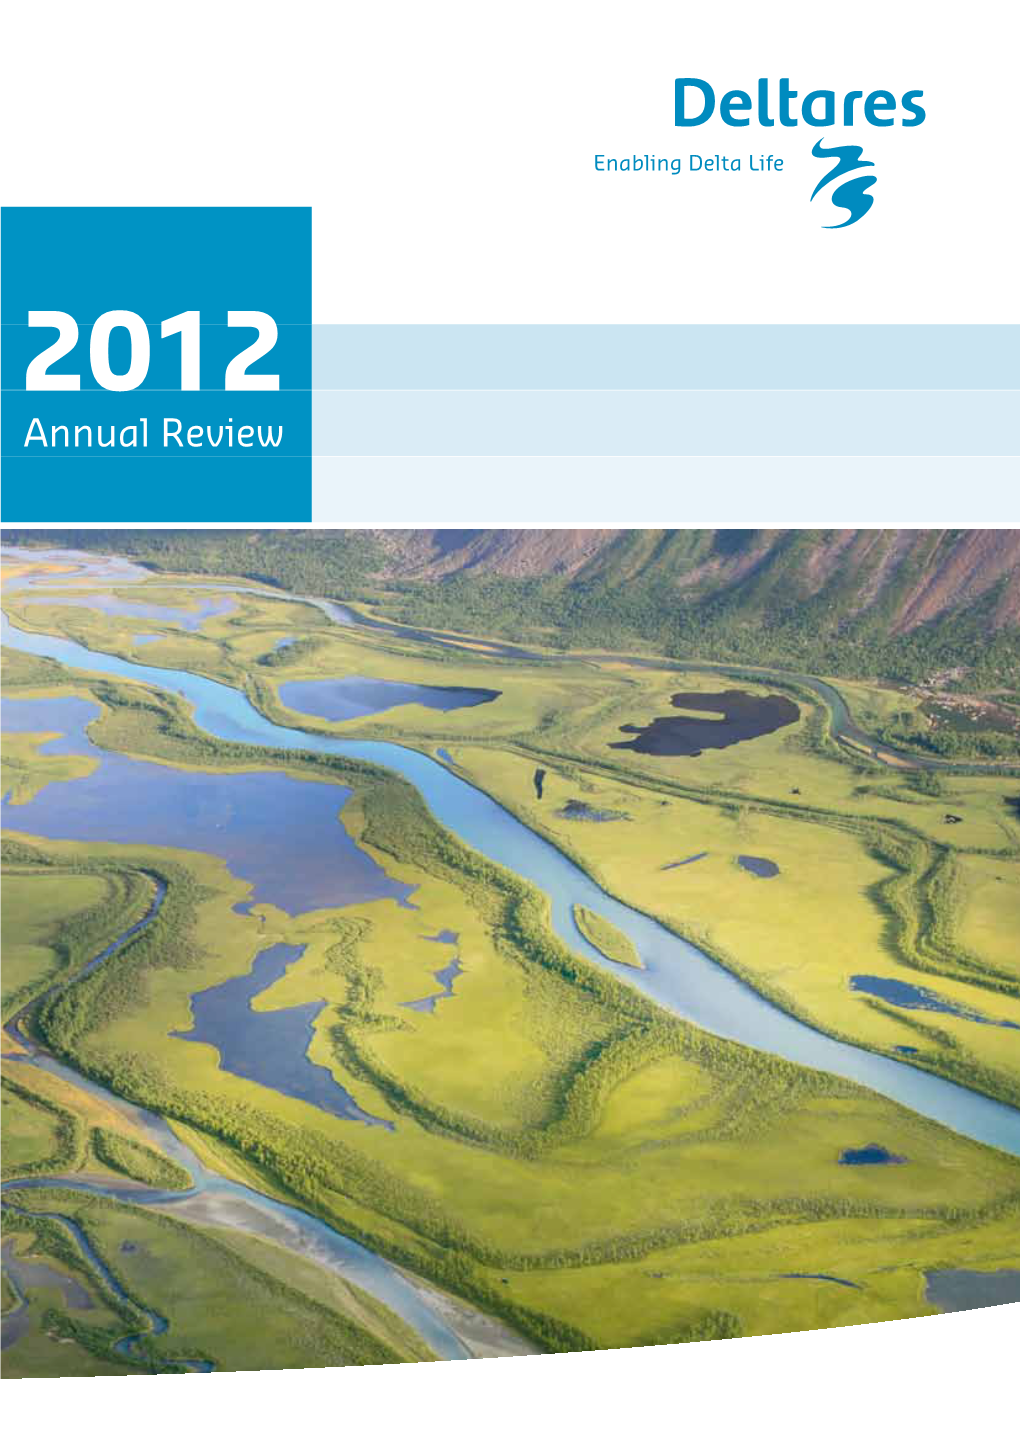 Annual Review 2012 Deltares